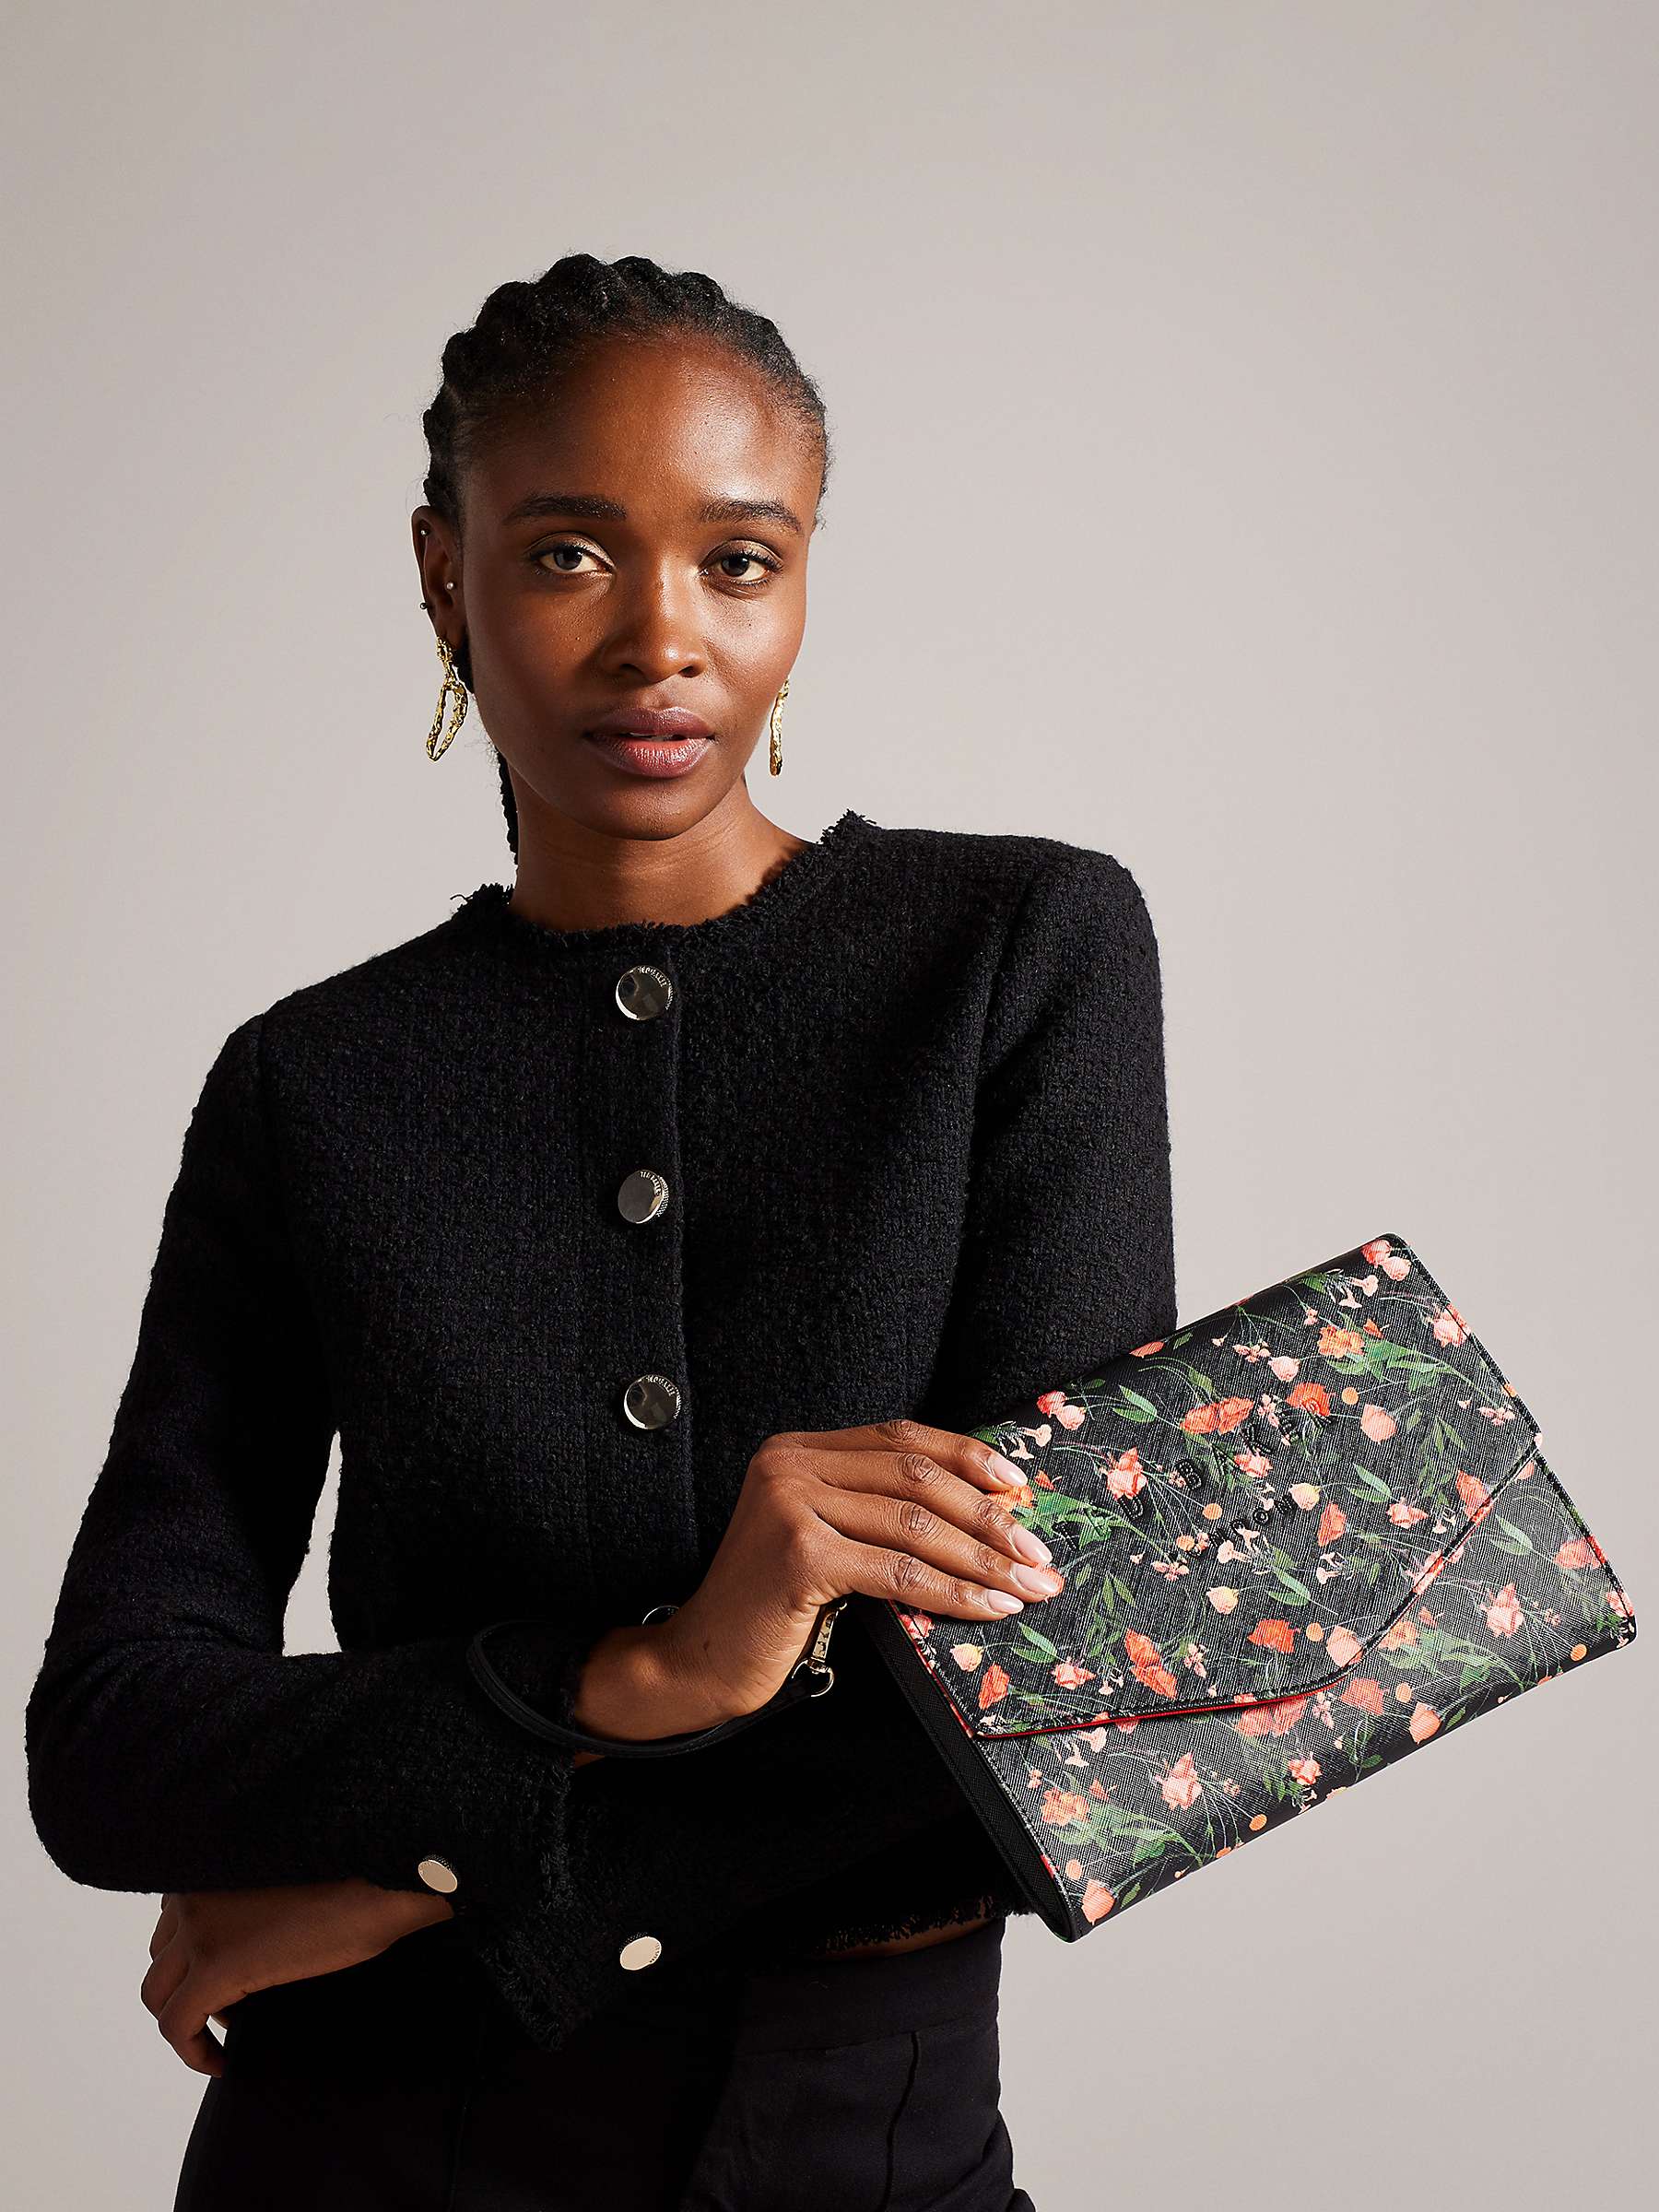 Buy Ted Baker Paiticn Floral Printed Envelope Pouch, Black/Multi Online at johnlewis.com